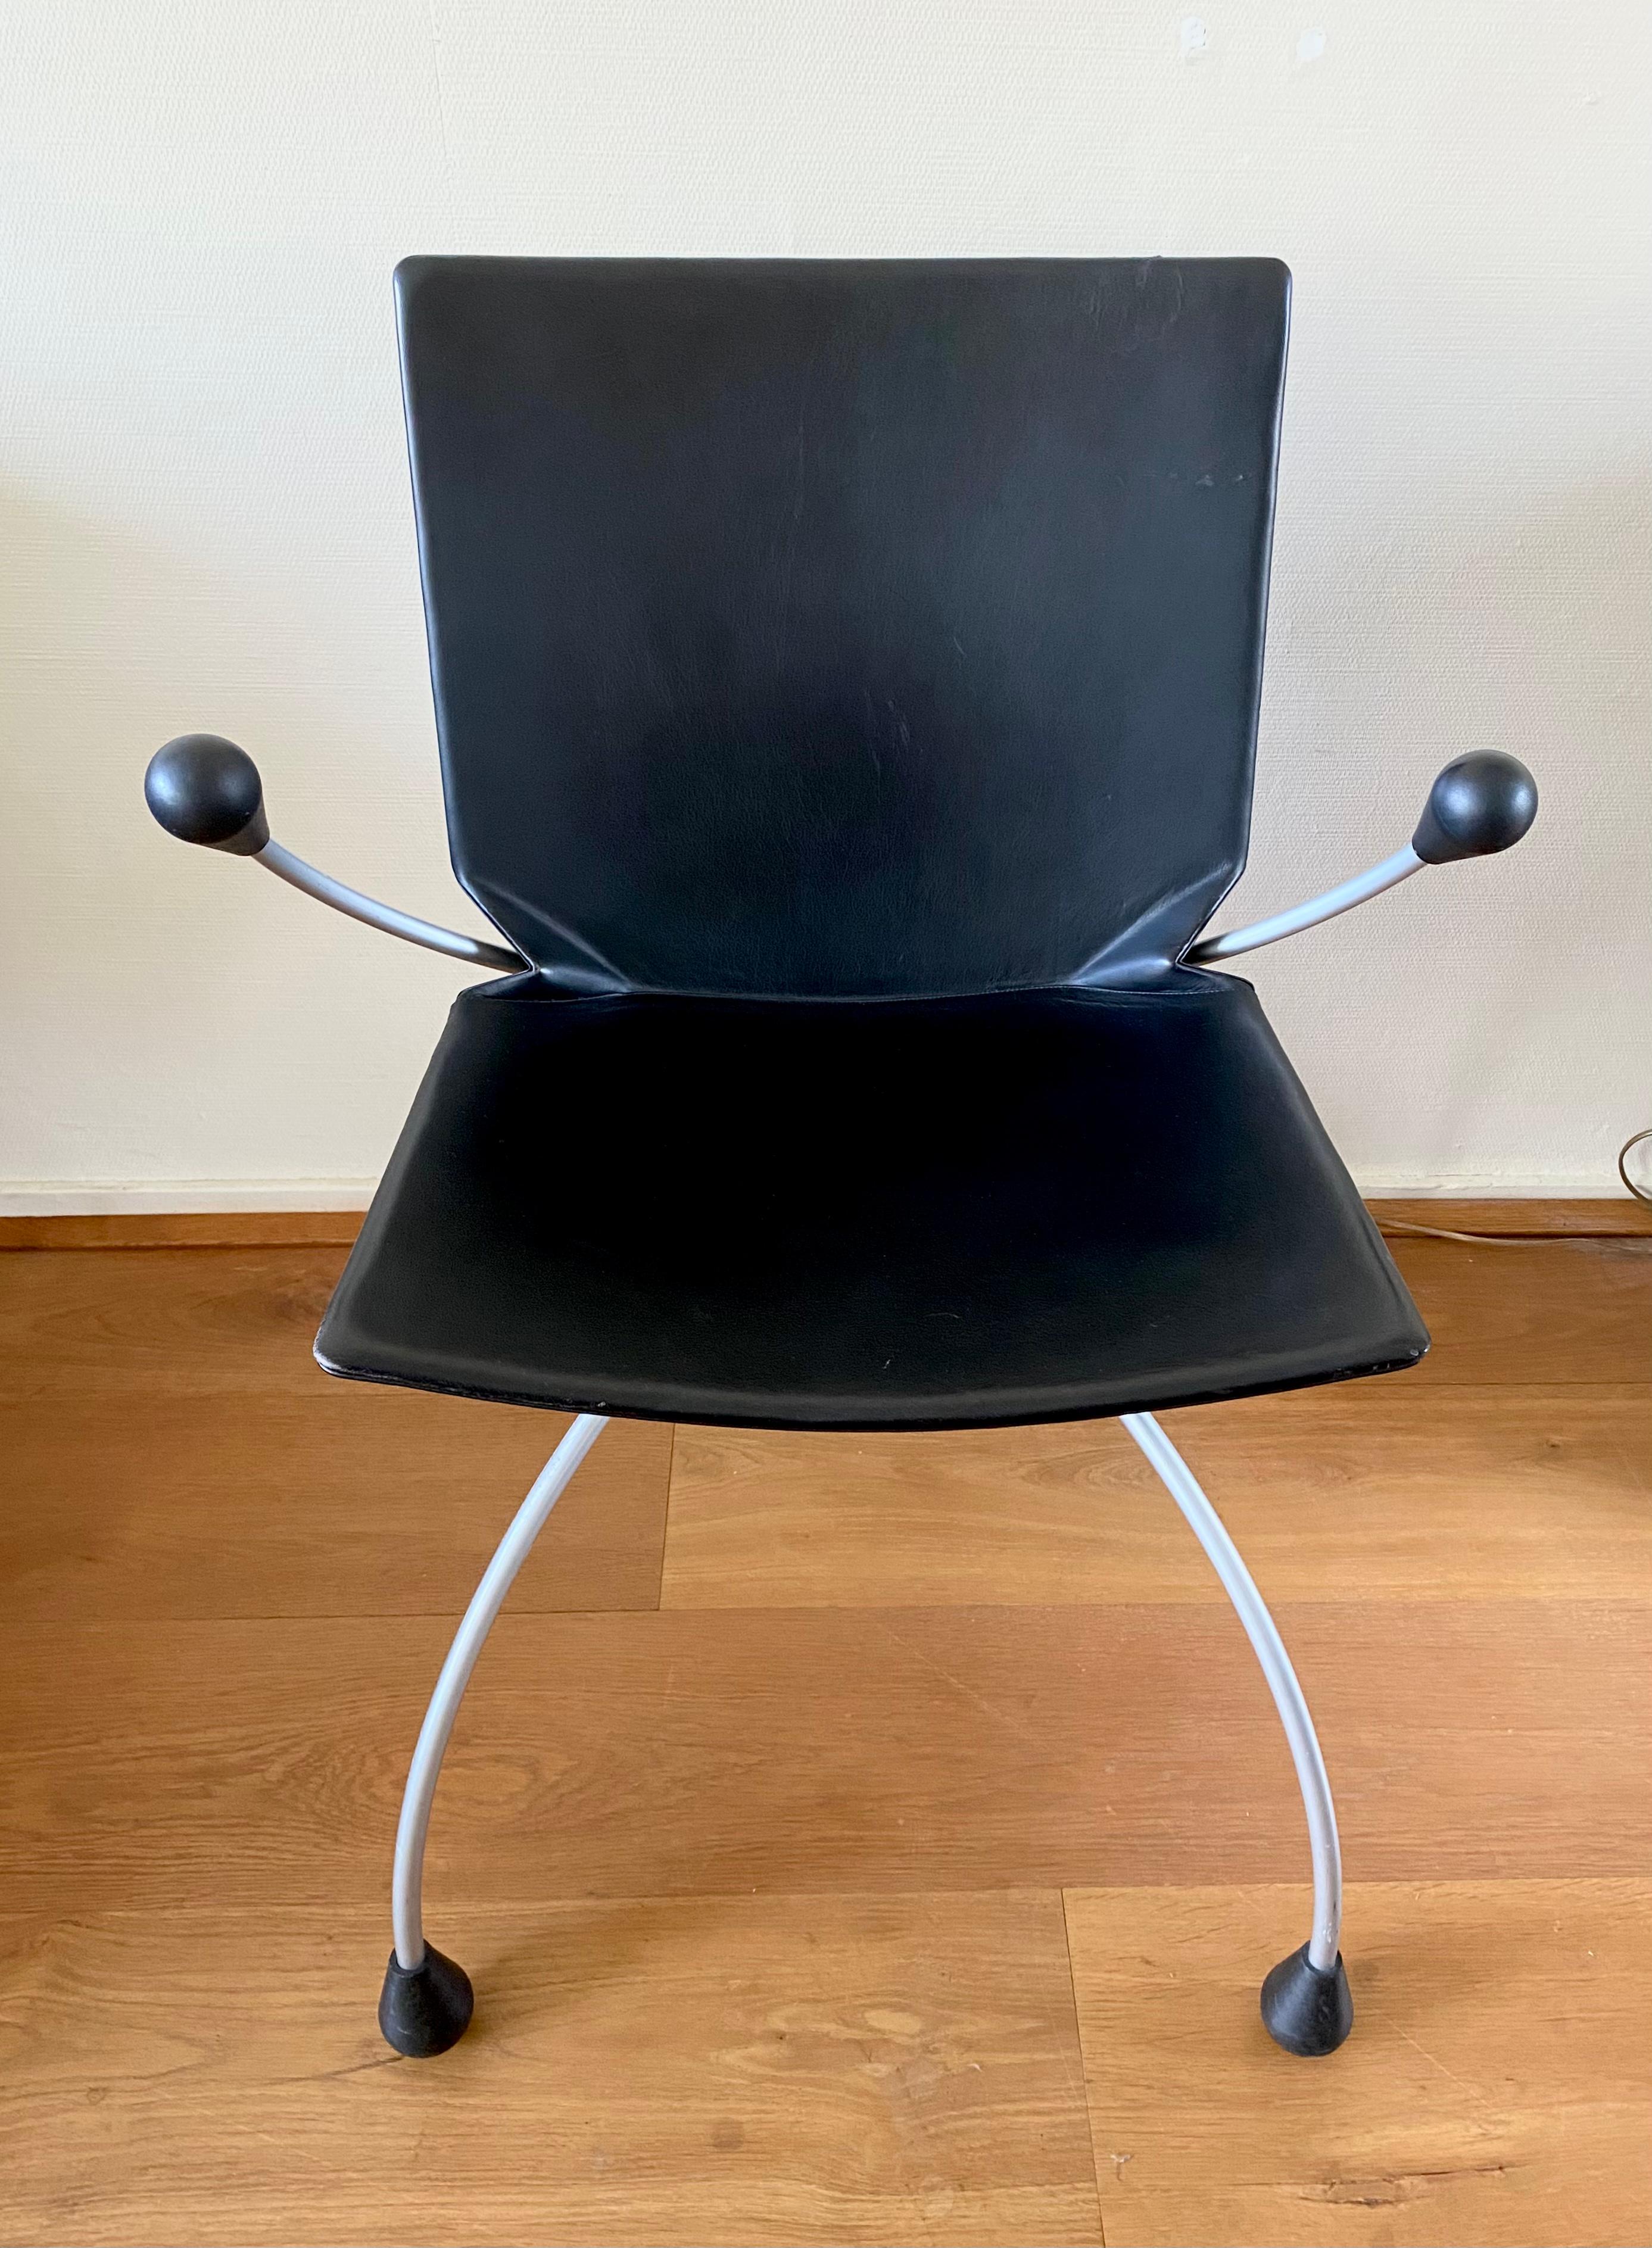 Black Leather Chair on a metal base, Designed by Pierre Mazairac & Karel Boonzaaijer for Young International. 80s Post modern Design which remains in good condition with wear consistent with age and use (see:images).